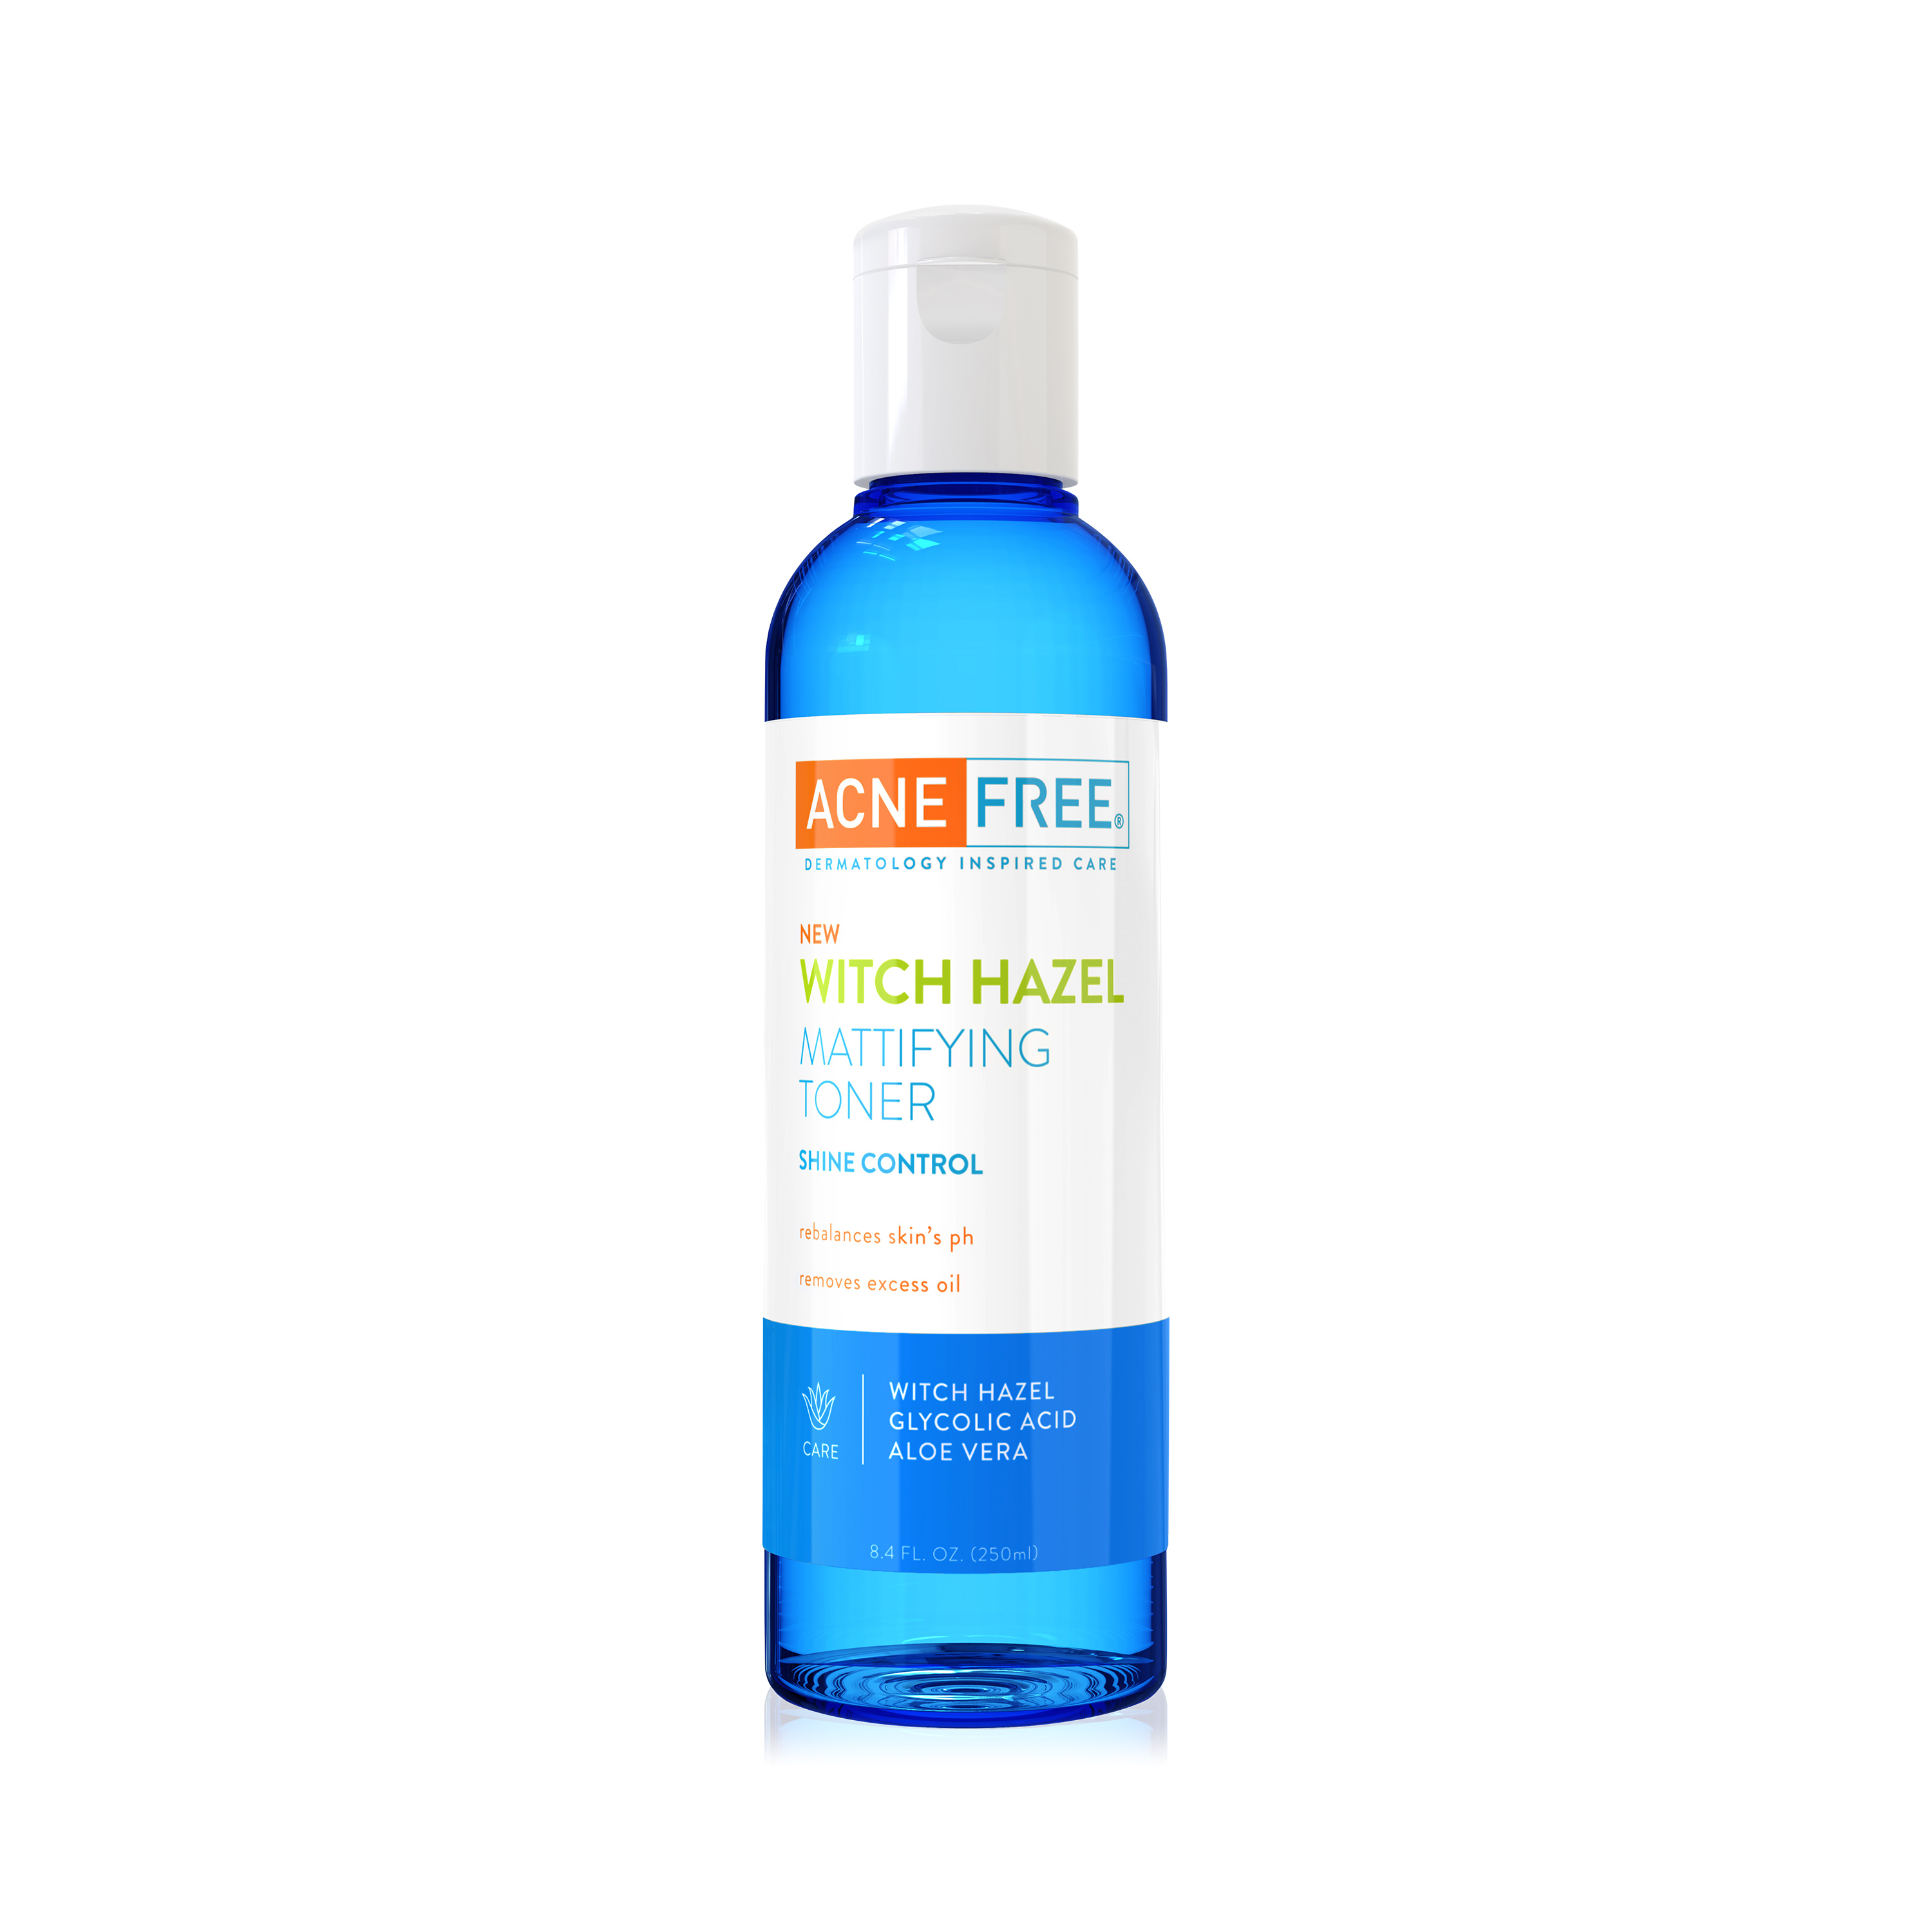 AcneFree Witch Hazel Mattifying Face Toner for Shine Control, All Skin Types, 8.4 oz - image 1 of 10